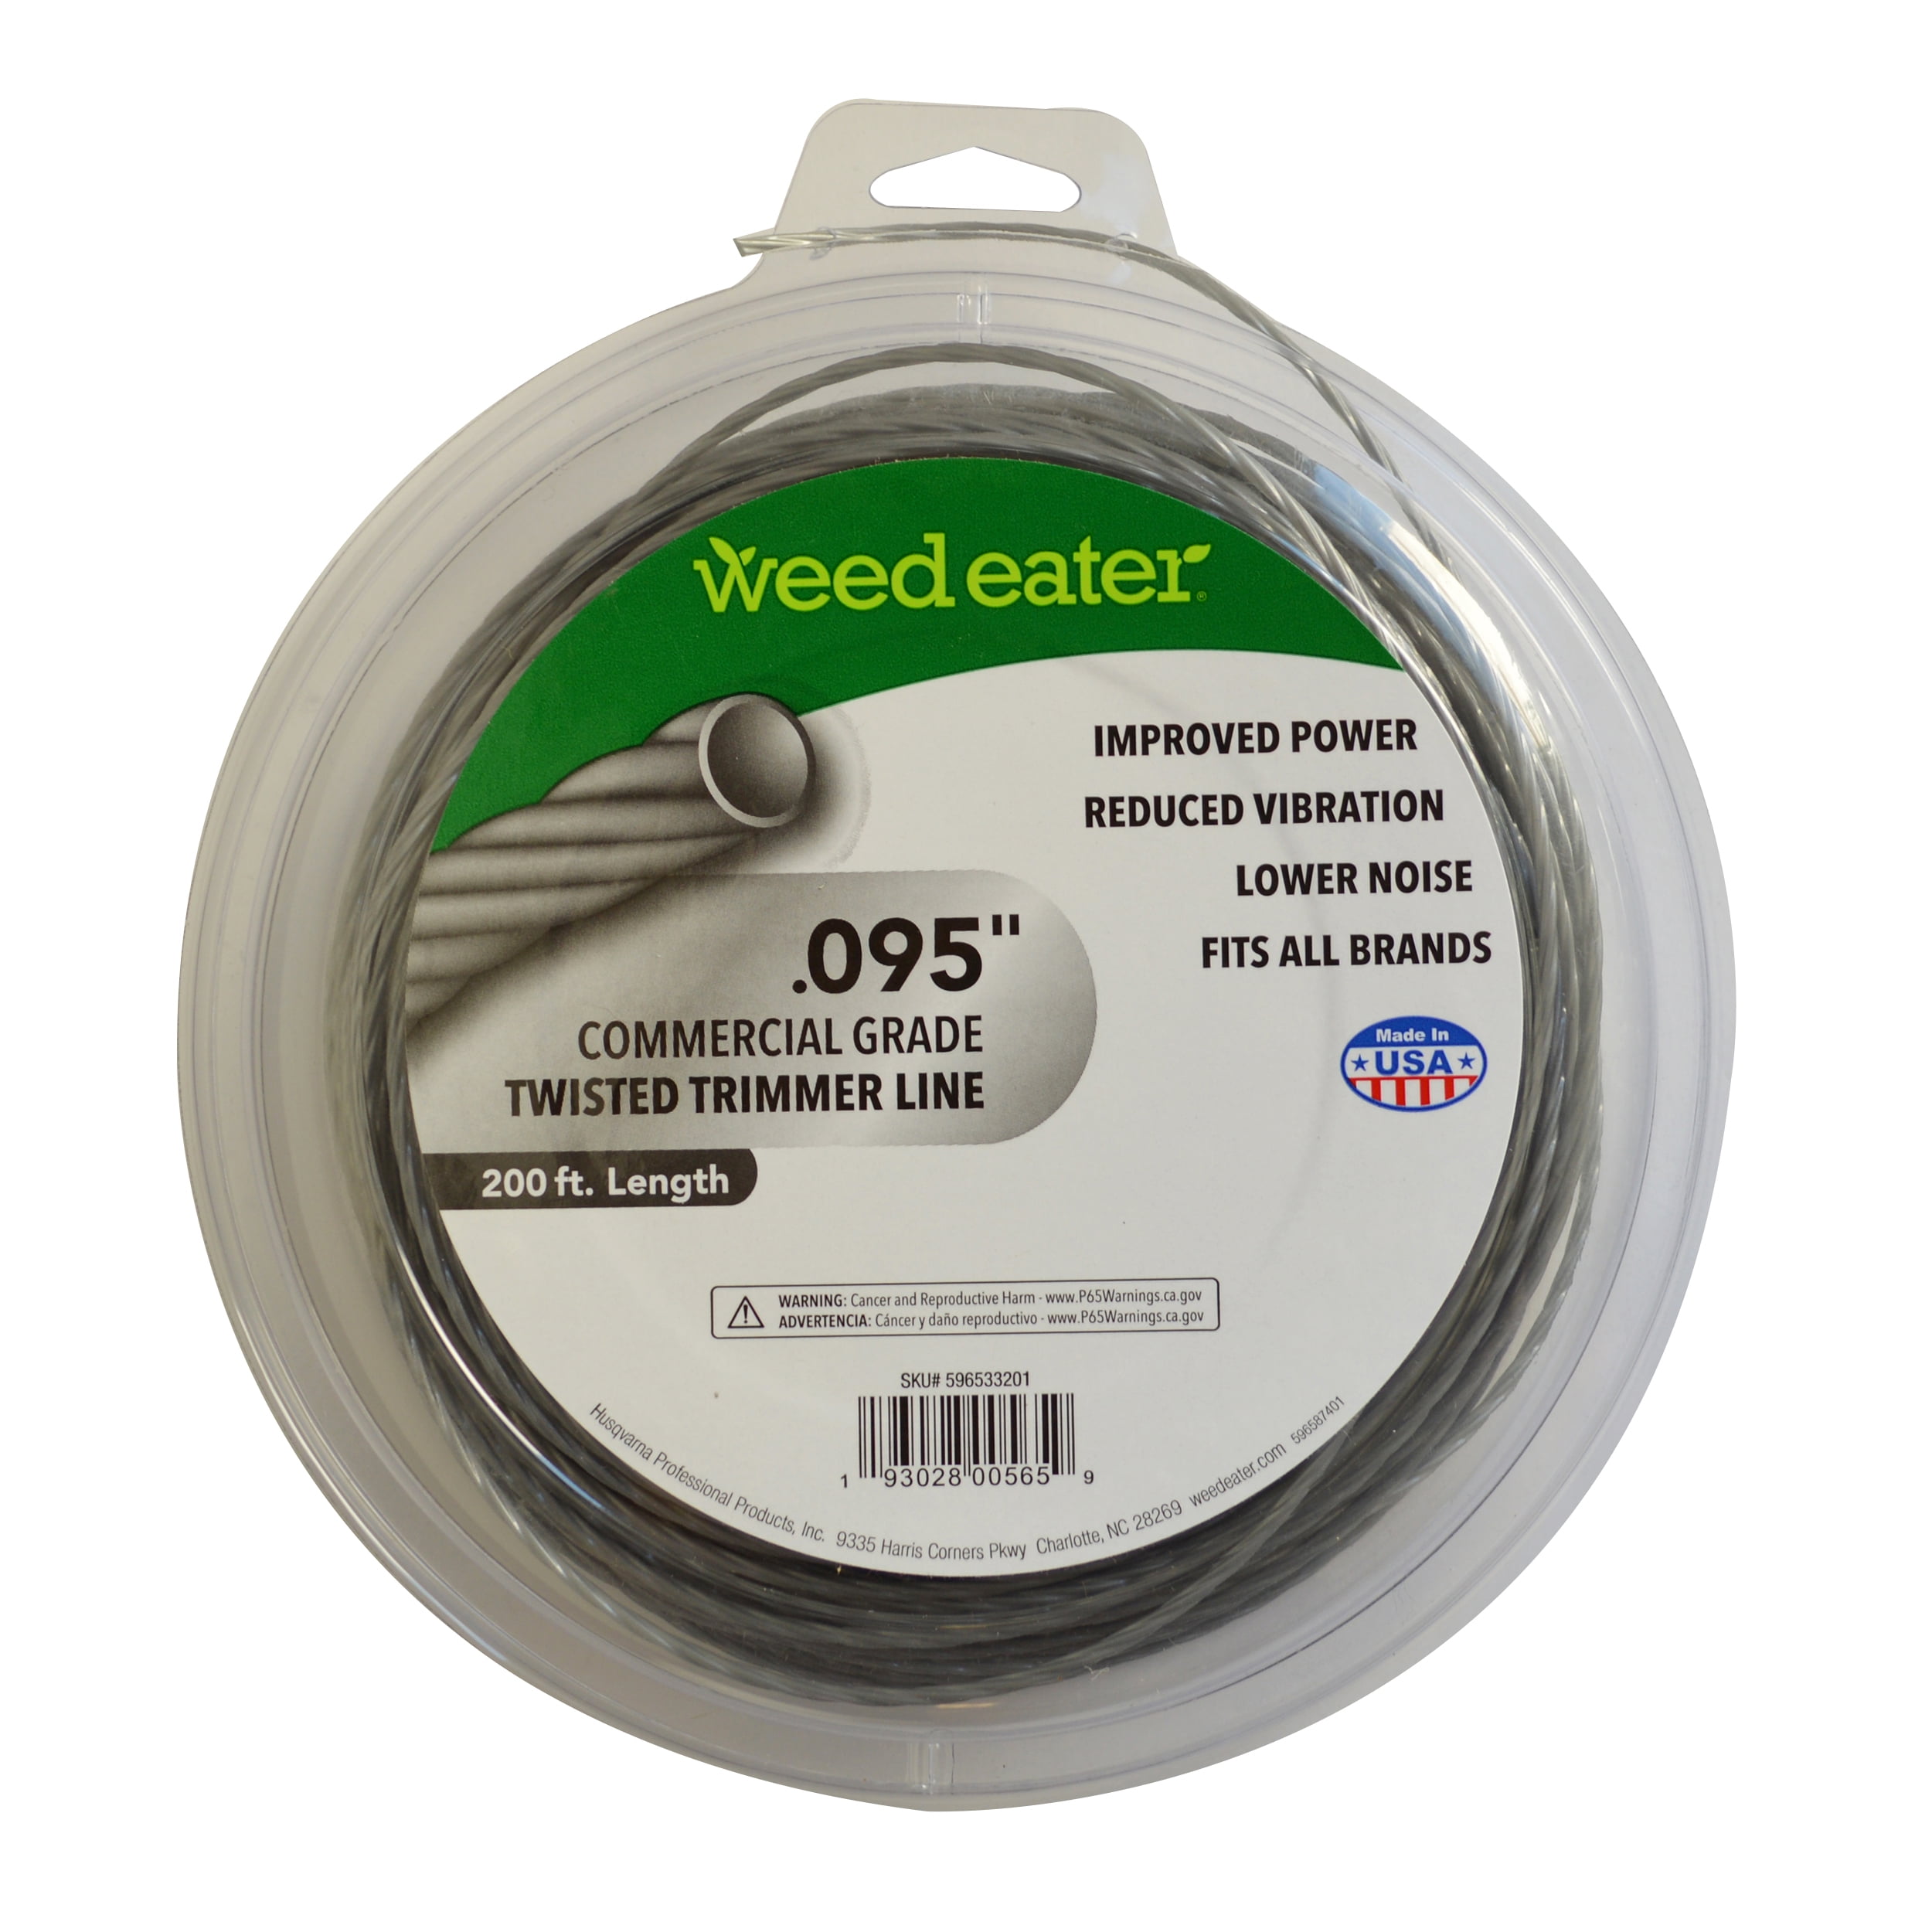 Weed Eater 095 in 200 ft Twisted Replacement Trimmer Line Walmart com